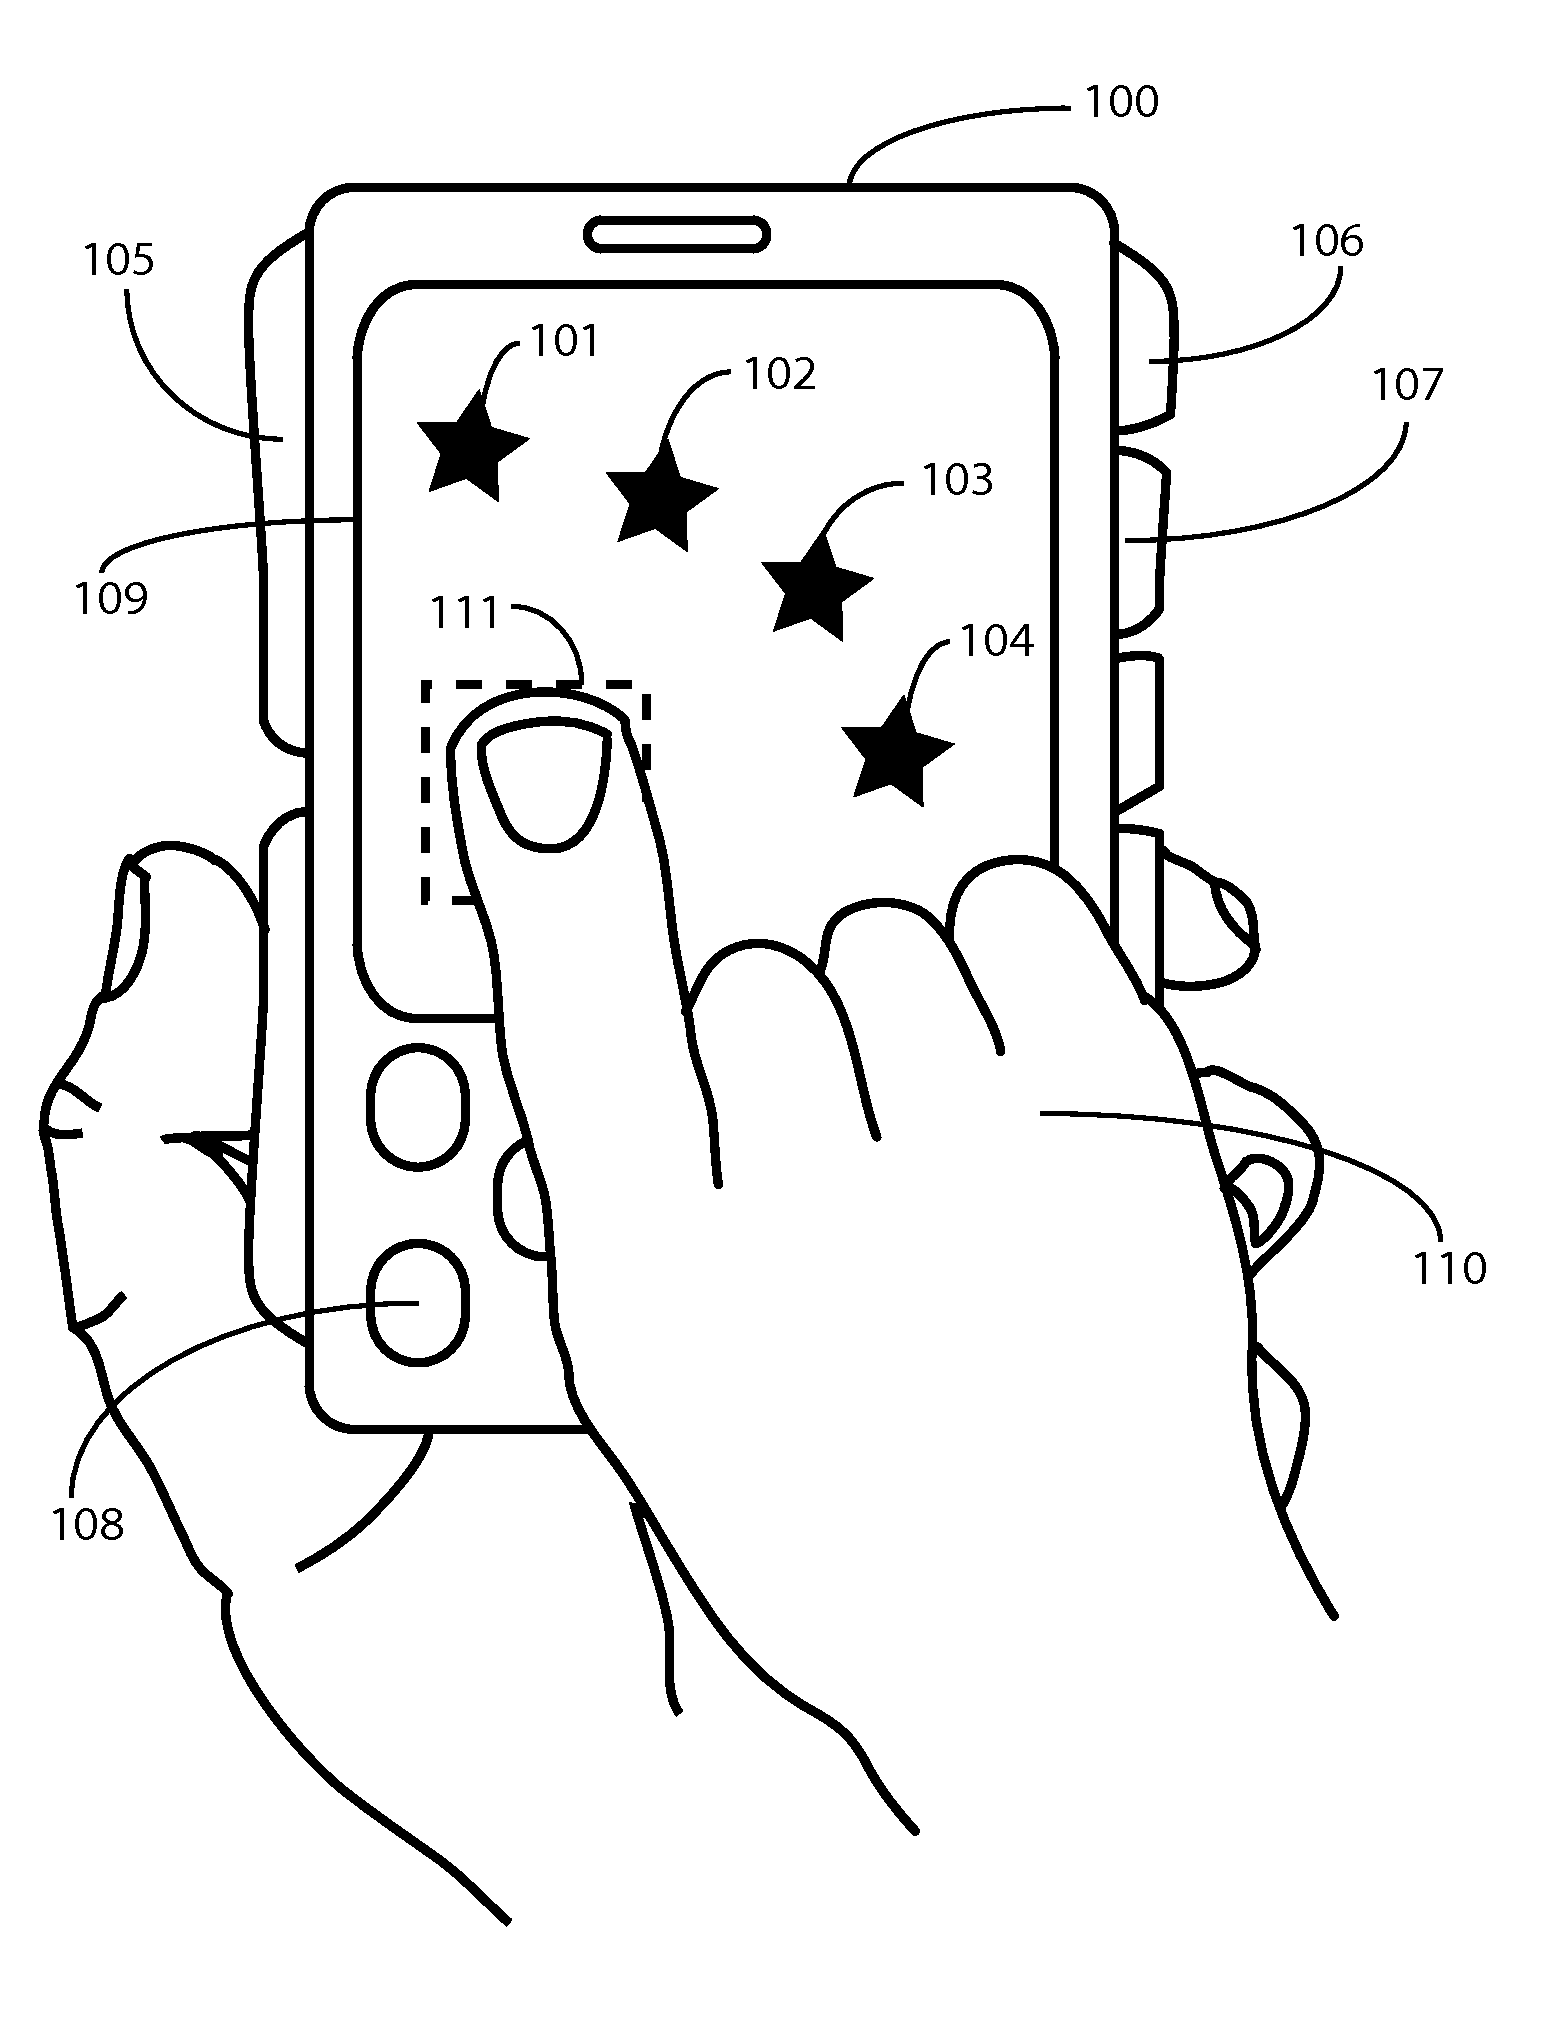 Method and apparatus for replicating physical key function with soft keys in an electronic device